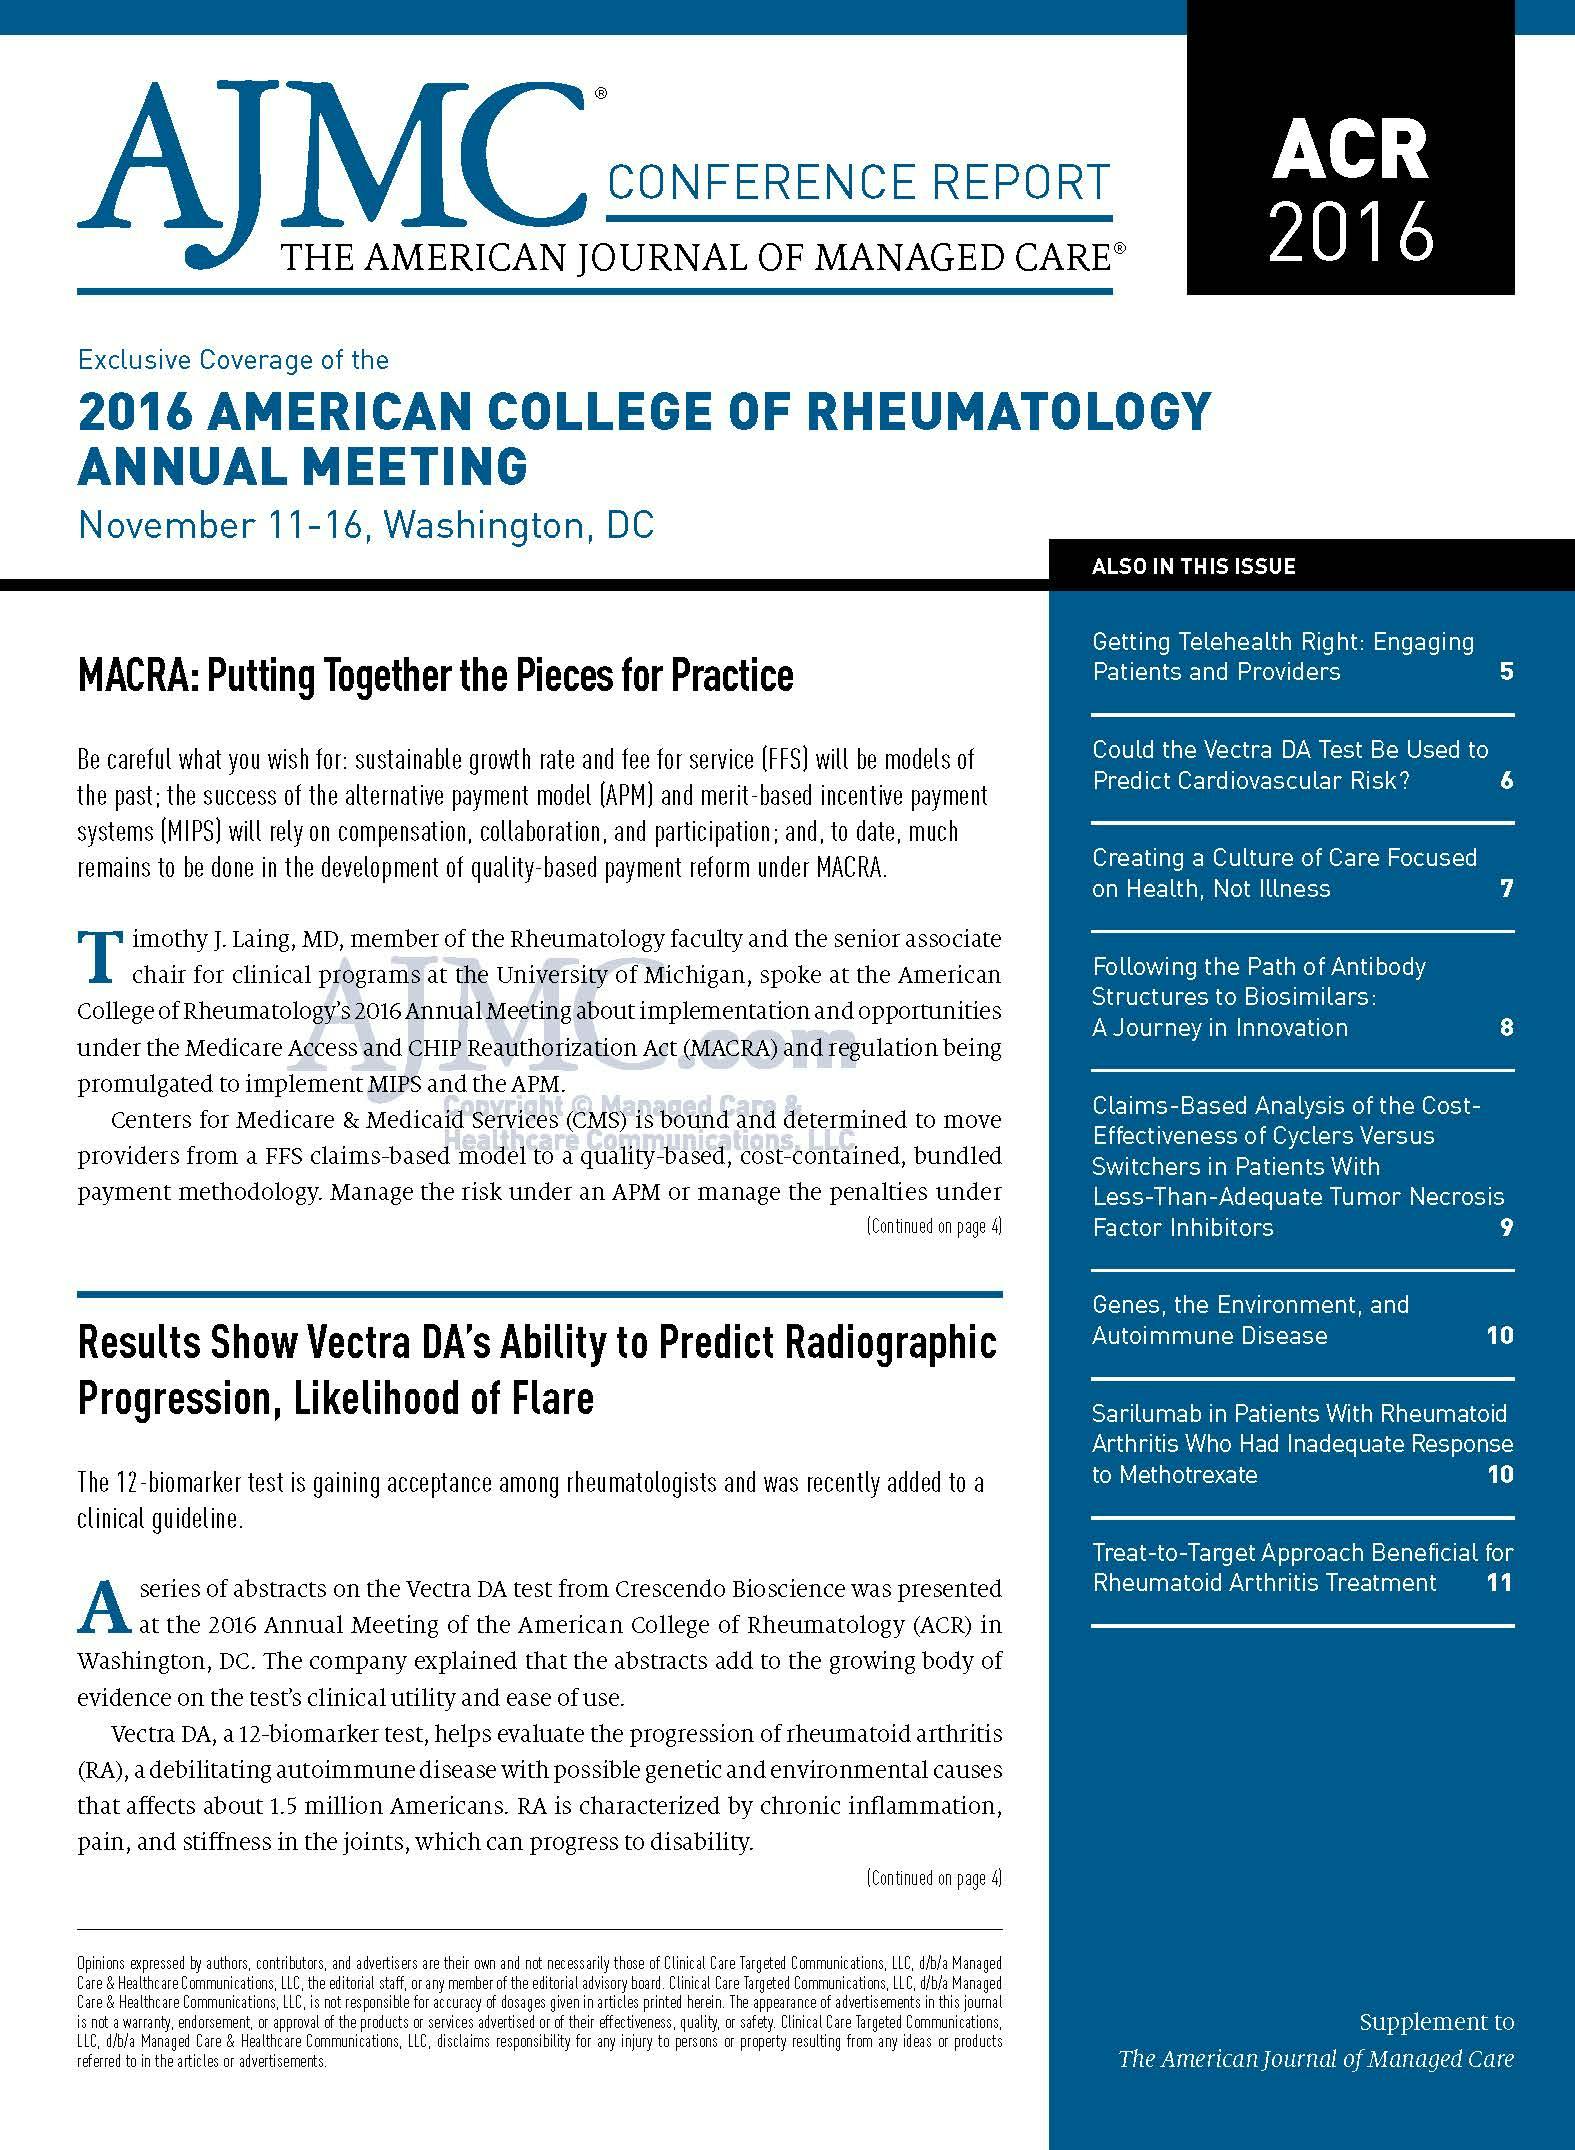 Exclusive Coverage of the American College of Rheumatology Annual Meeting Washington, DC November 11